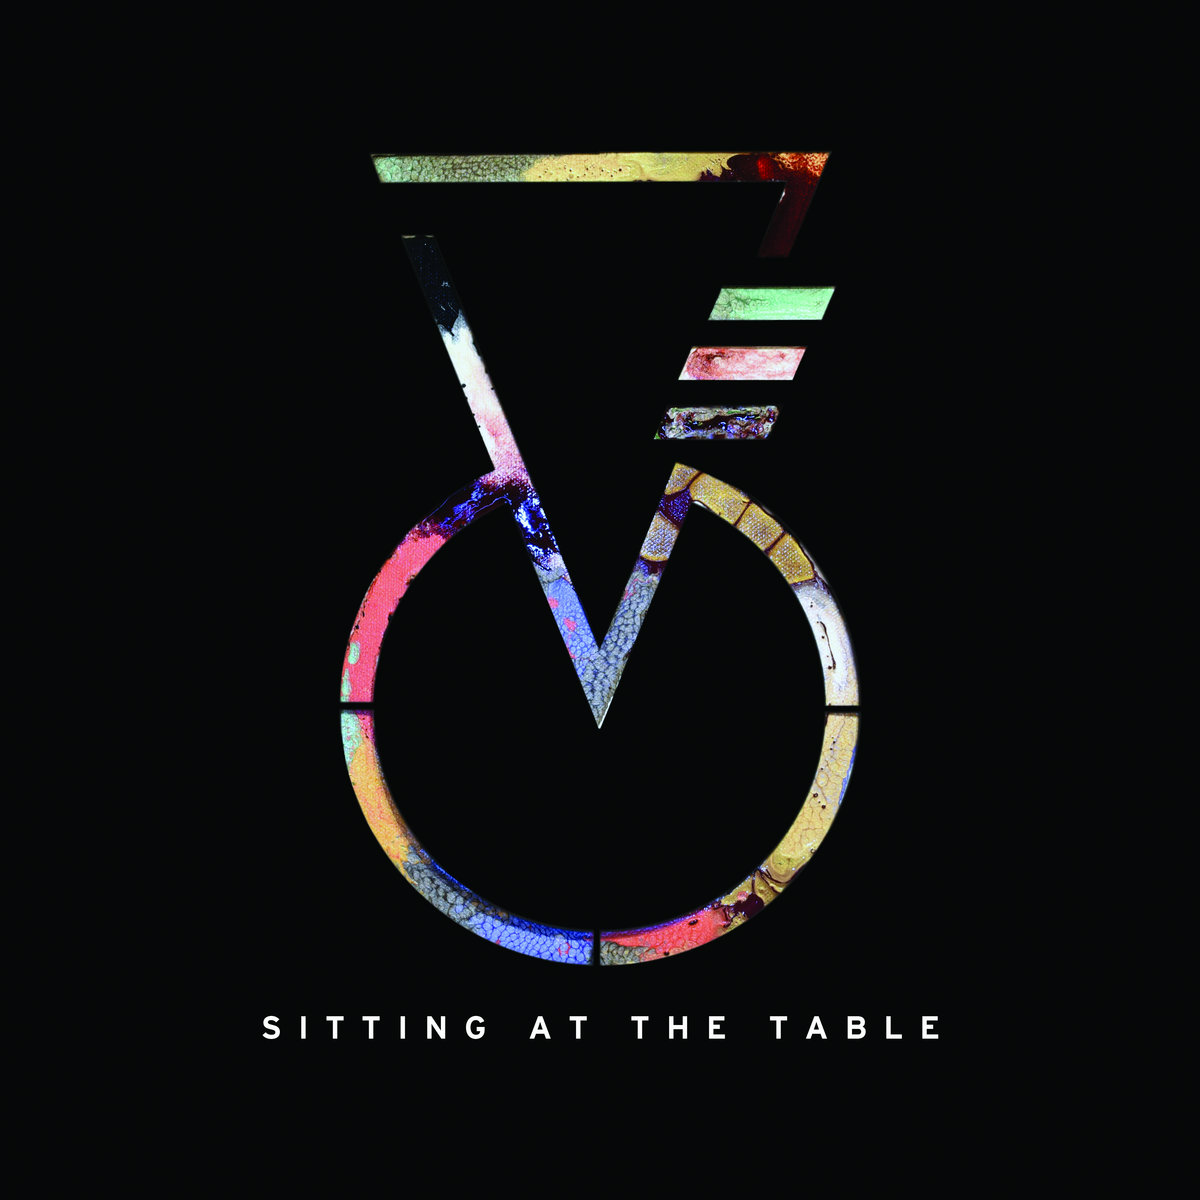 Sitting_at_the_table_voodoo_black